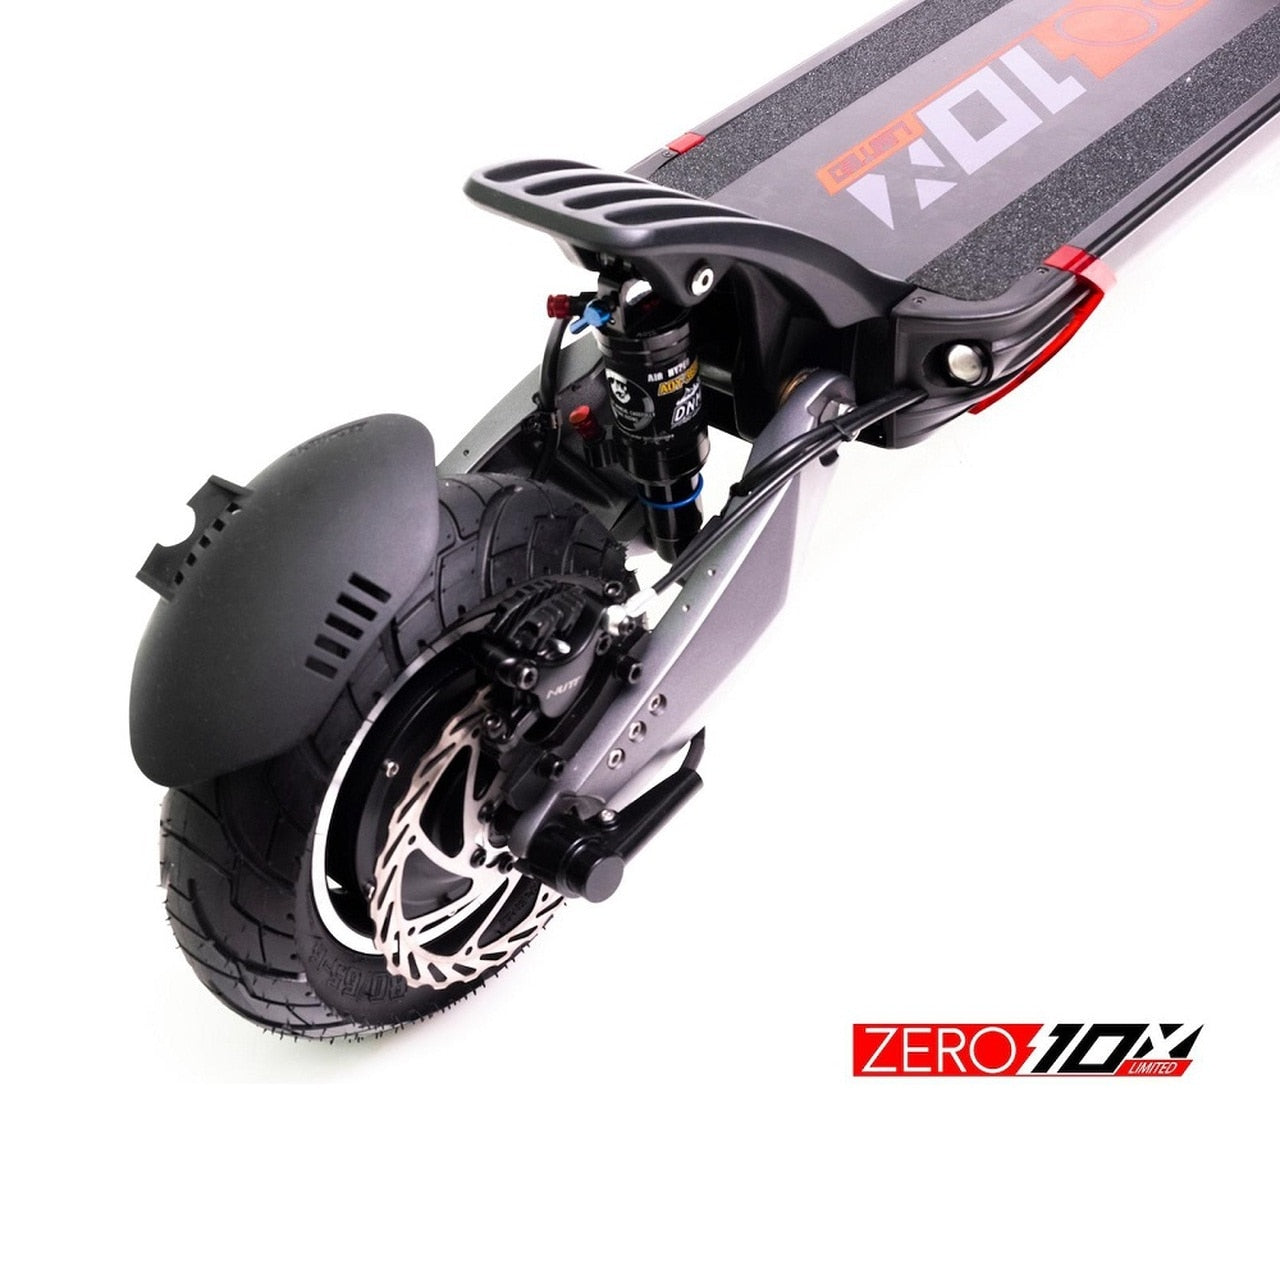 ZERO 10X 260 Limited Dual Wheel Drive Electric Scooter - 60V 28A Battery / 3200W Motors